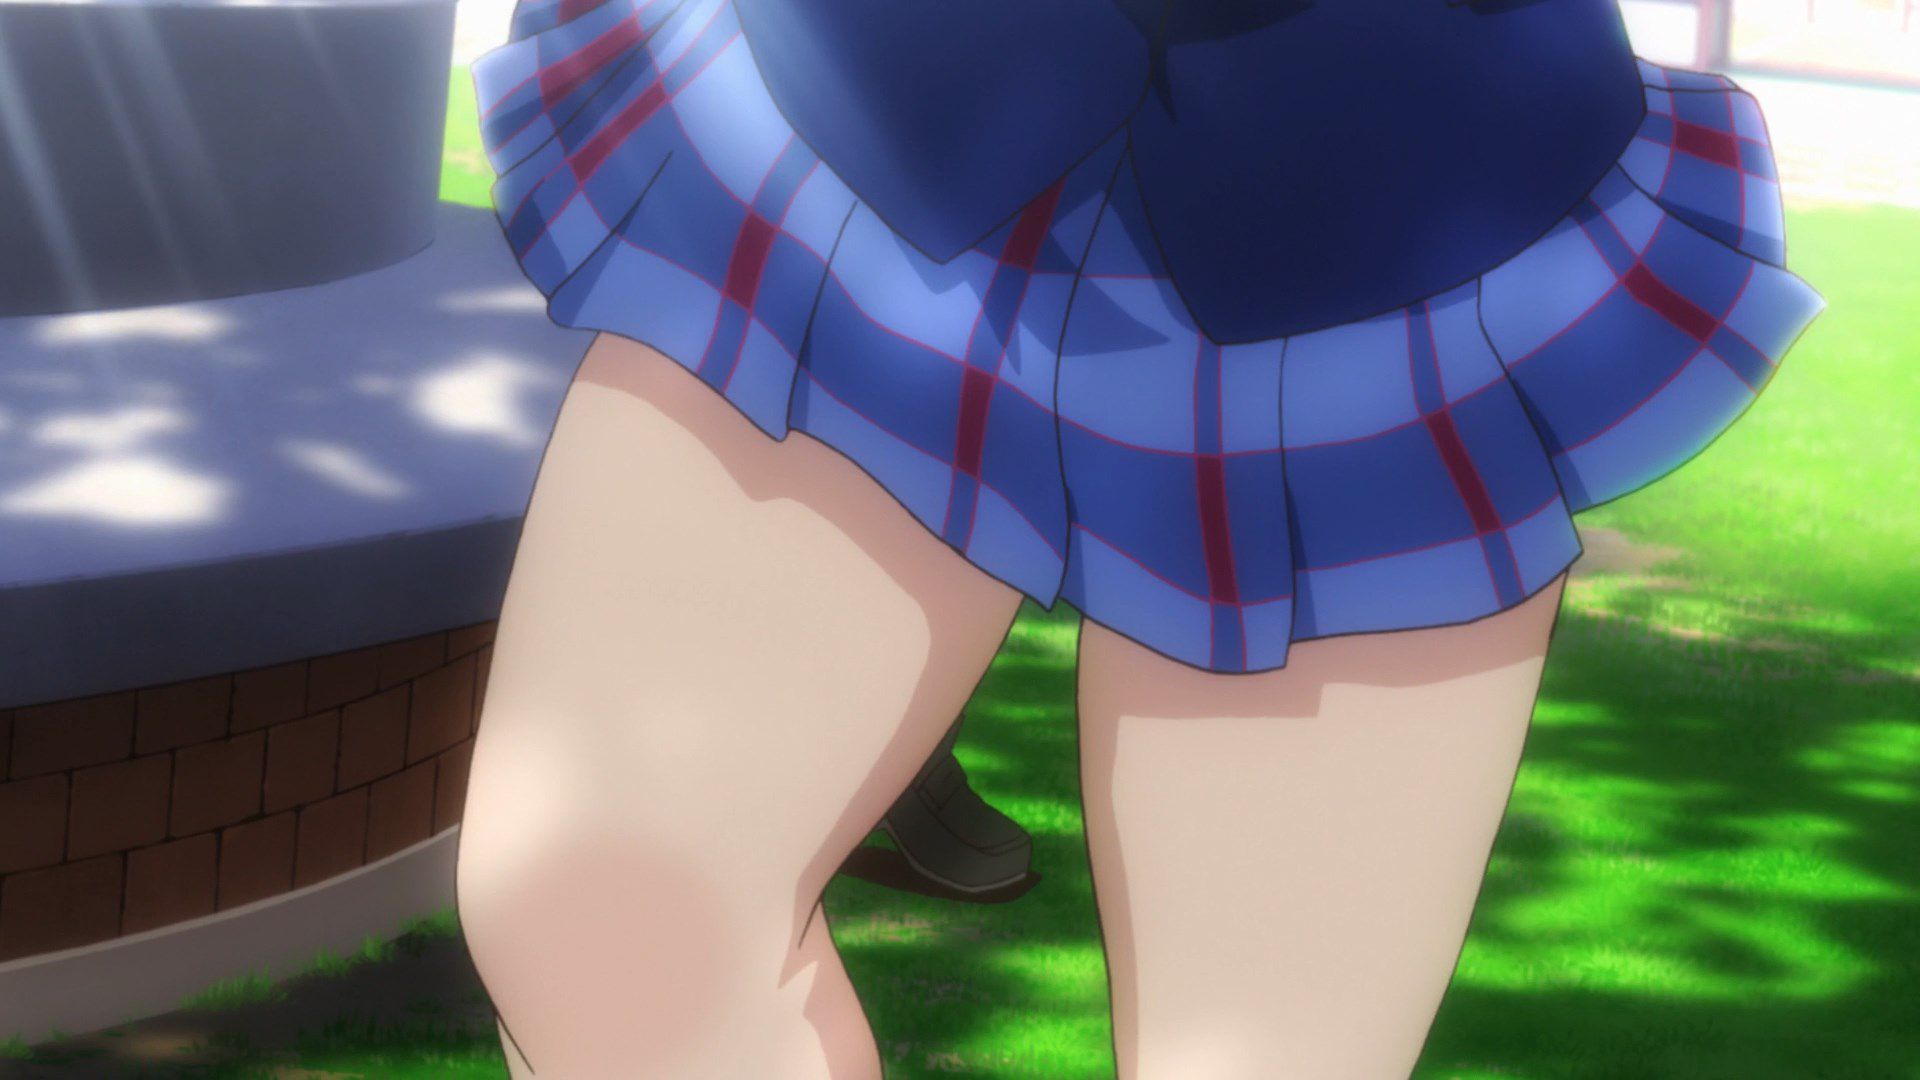 [God images] "love live! ' Μm ' PV's leg is too erotic everyone wakes up to a leg fetish of wwwww 93